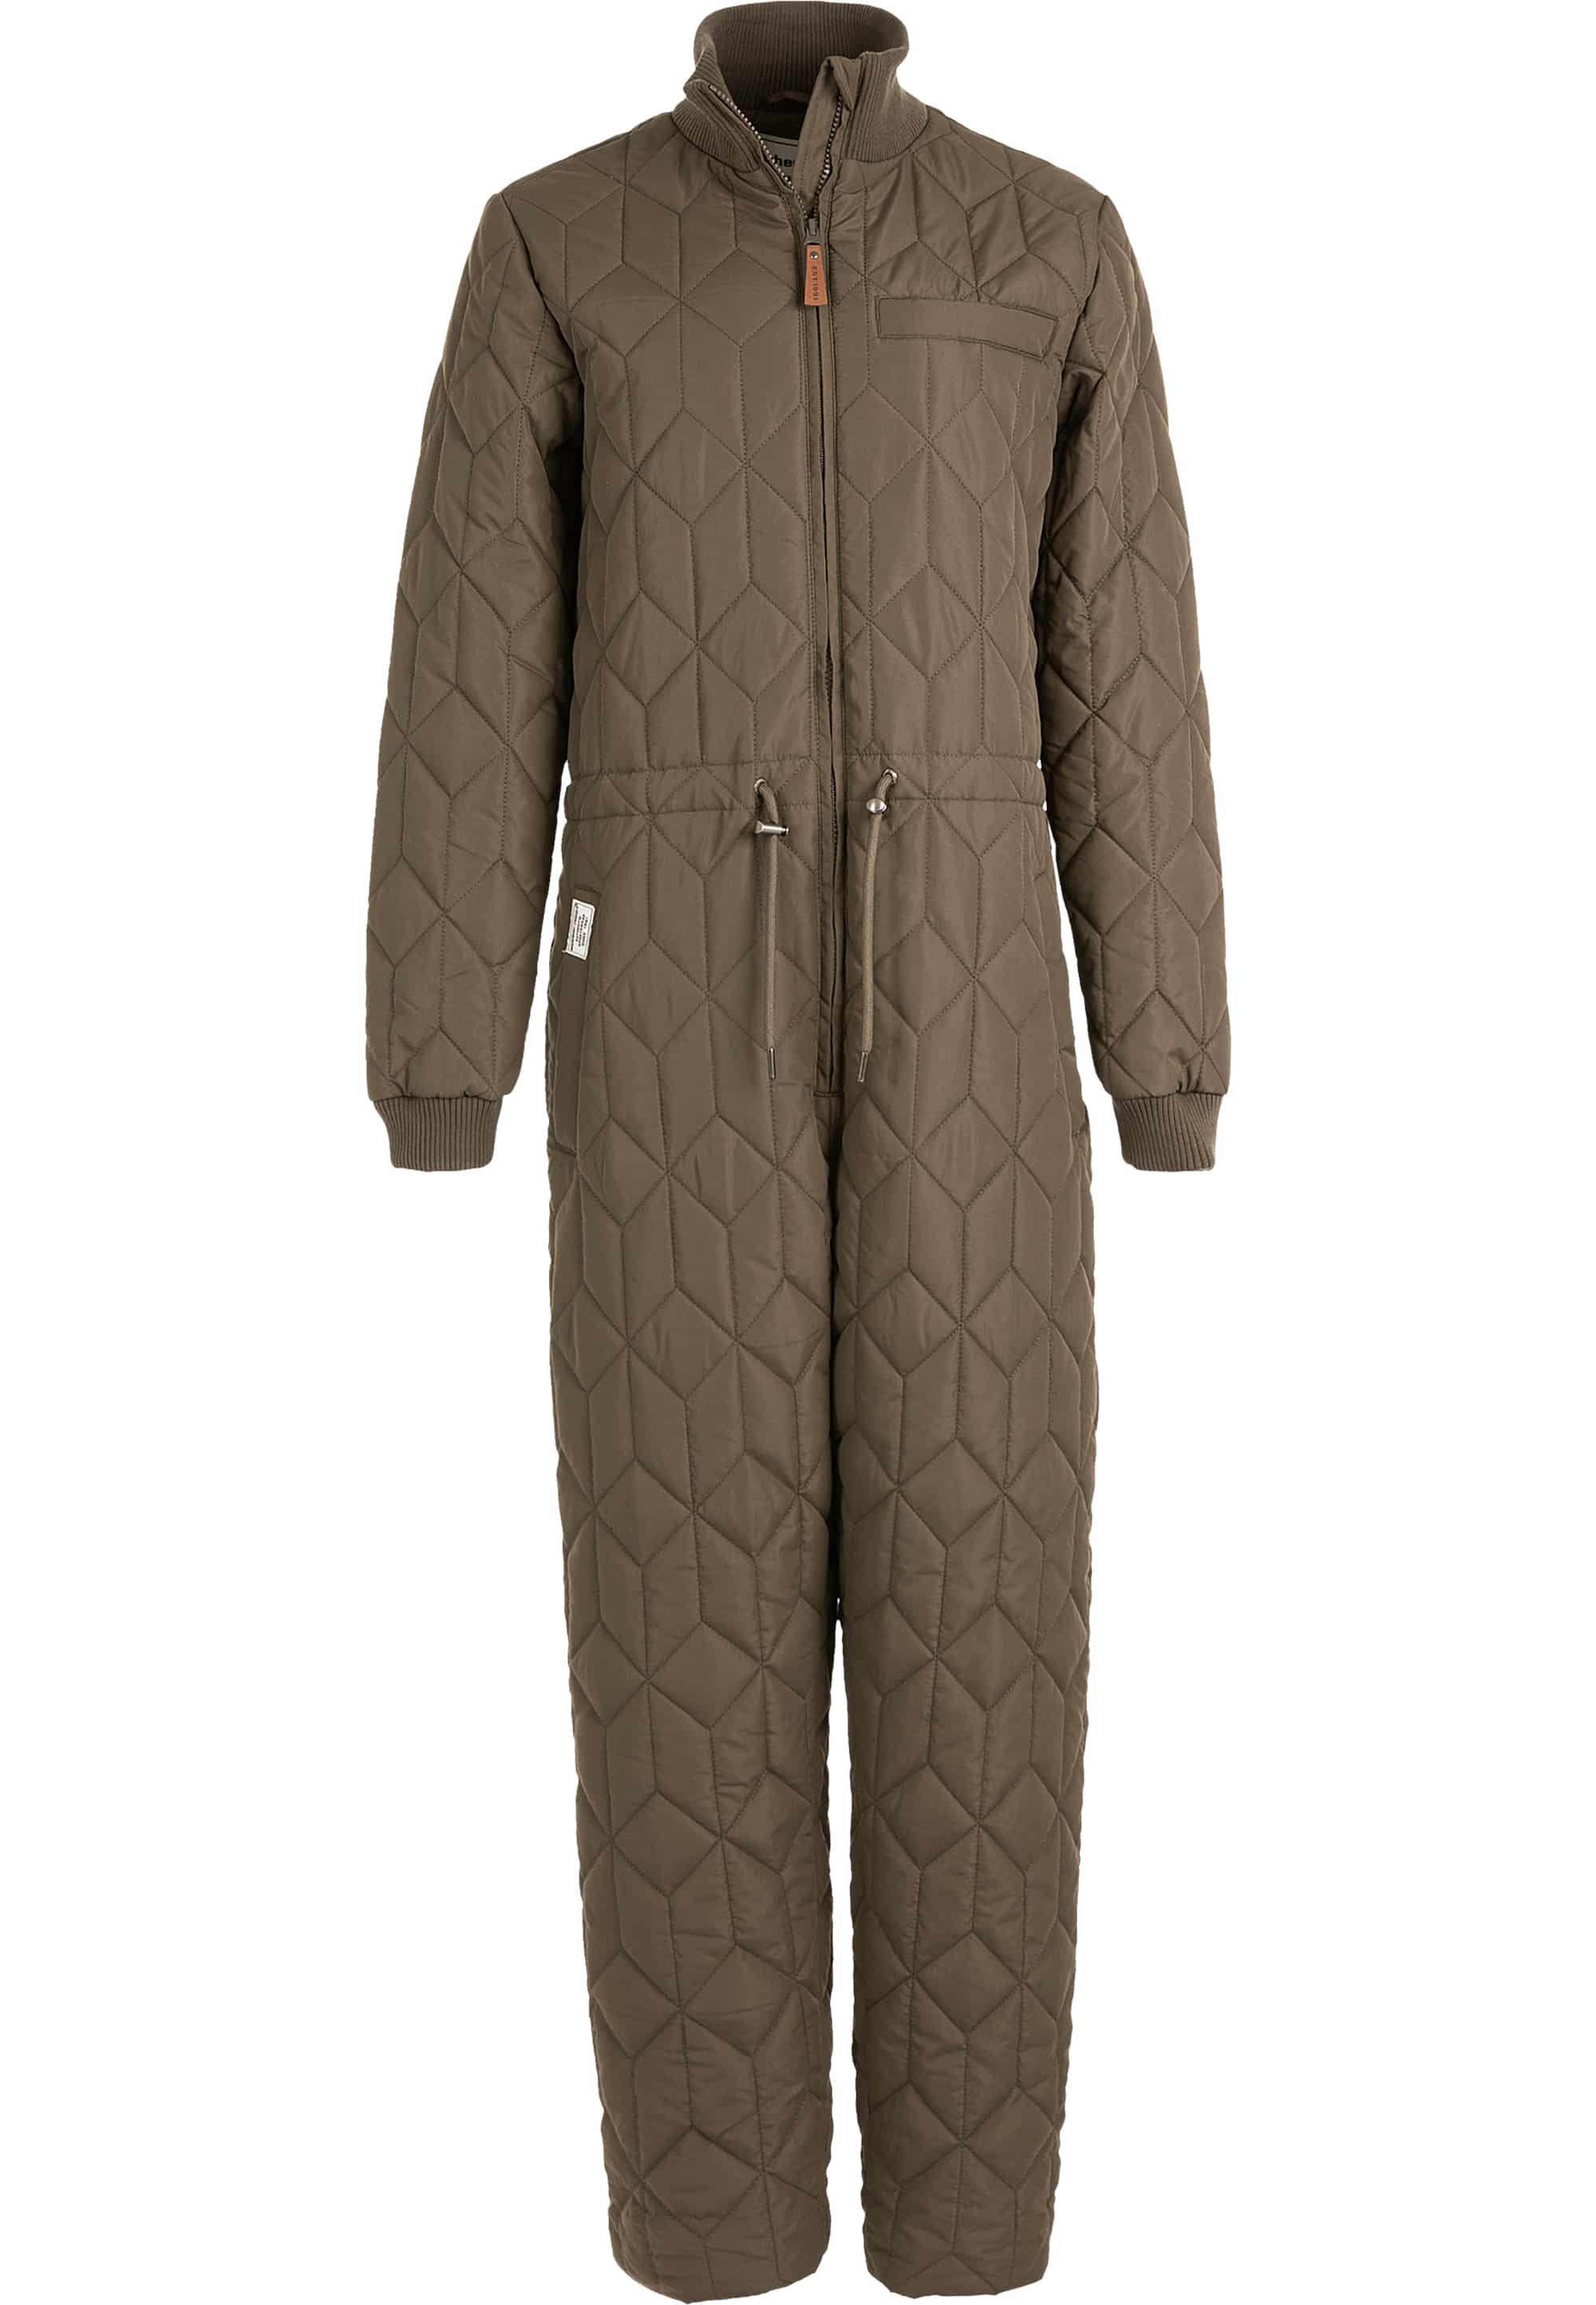 WEATHER REPORT Vidda W Quilted Jumpsuit Oliven - 40 - Oliven